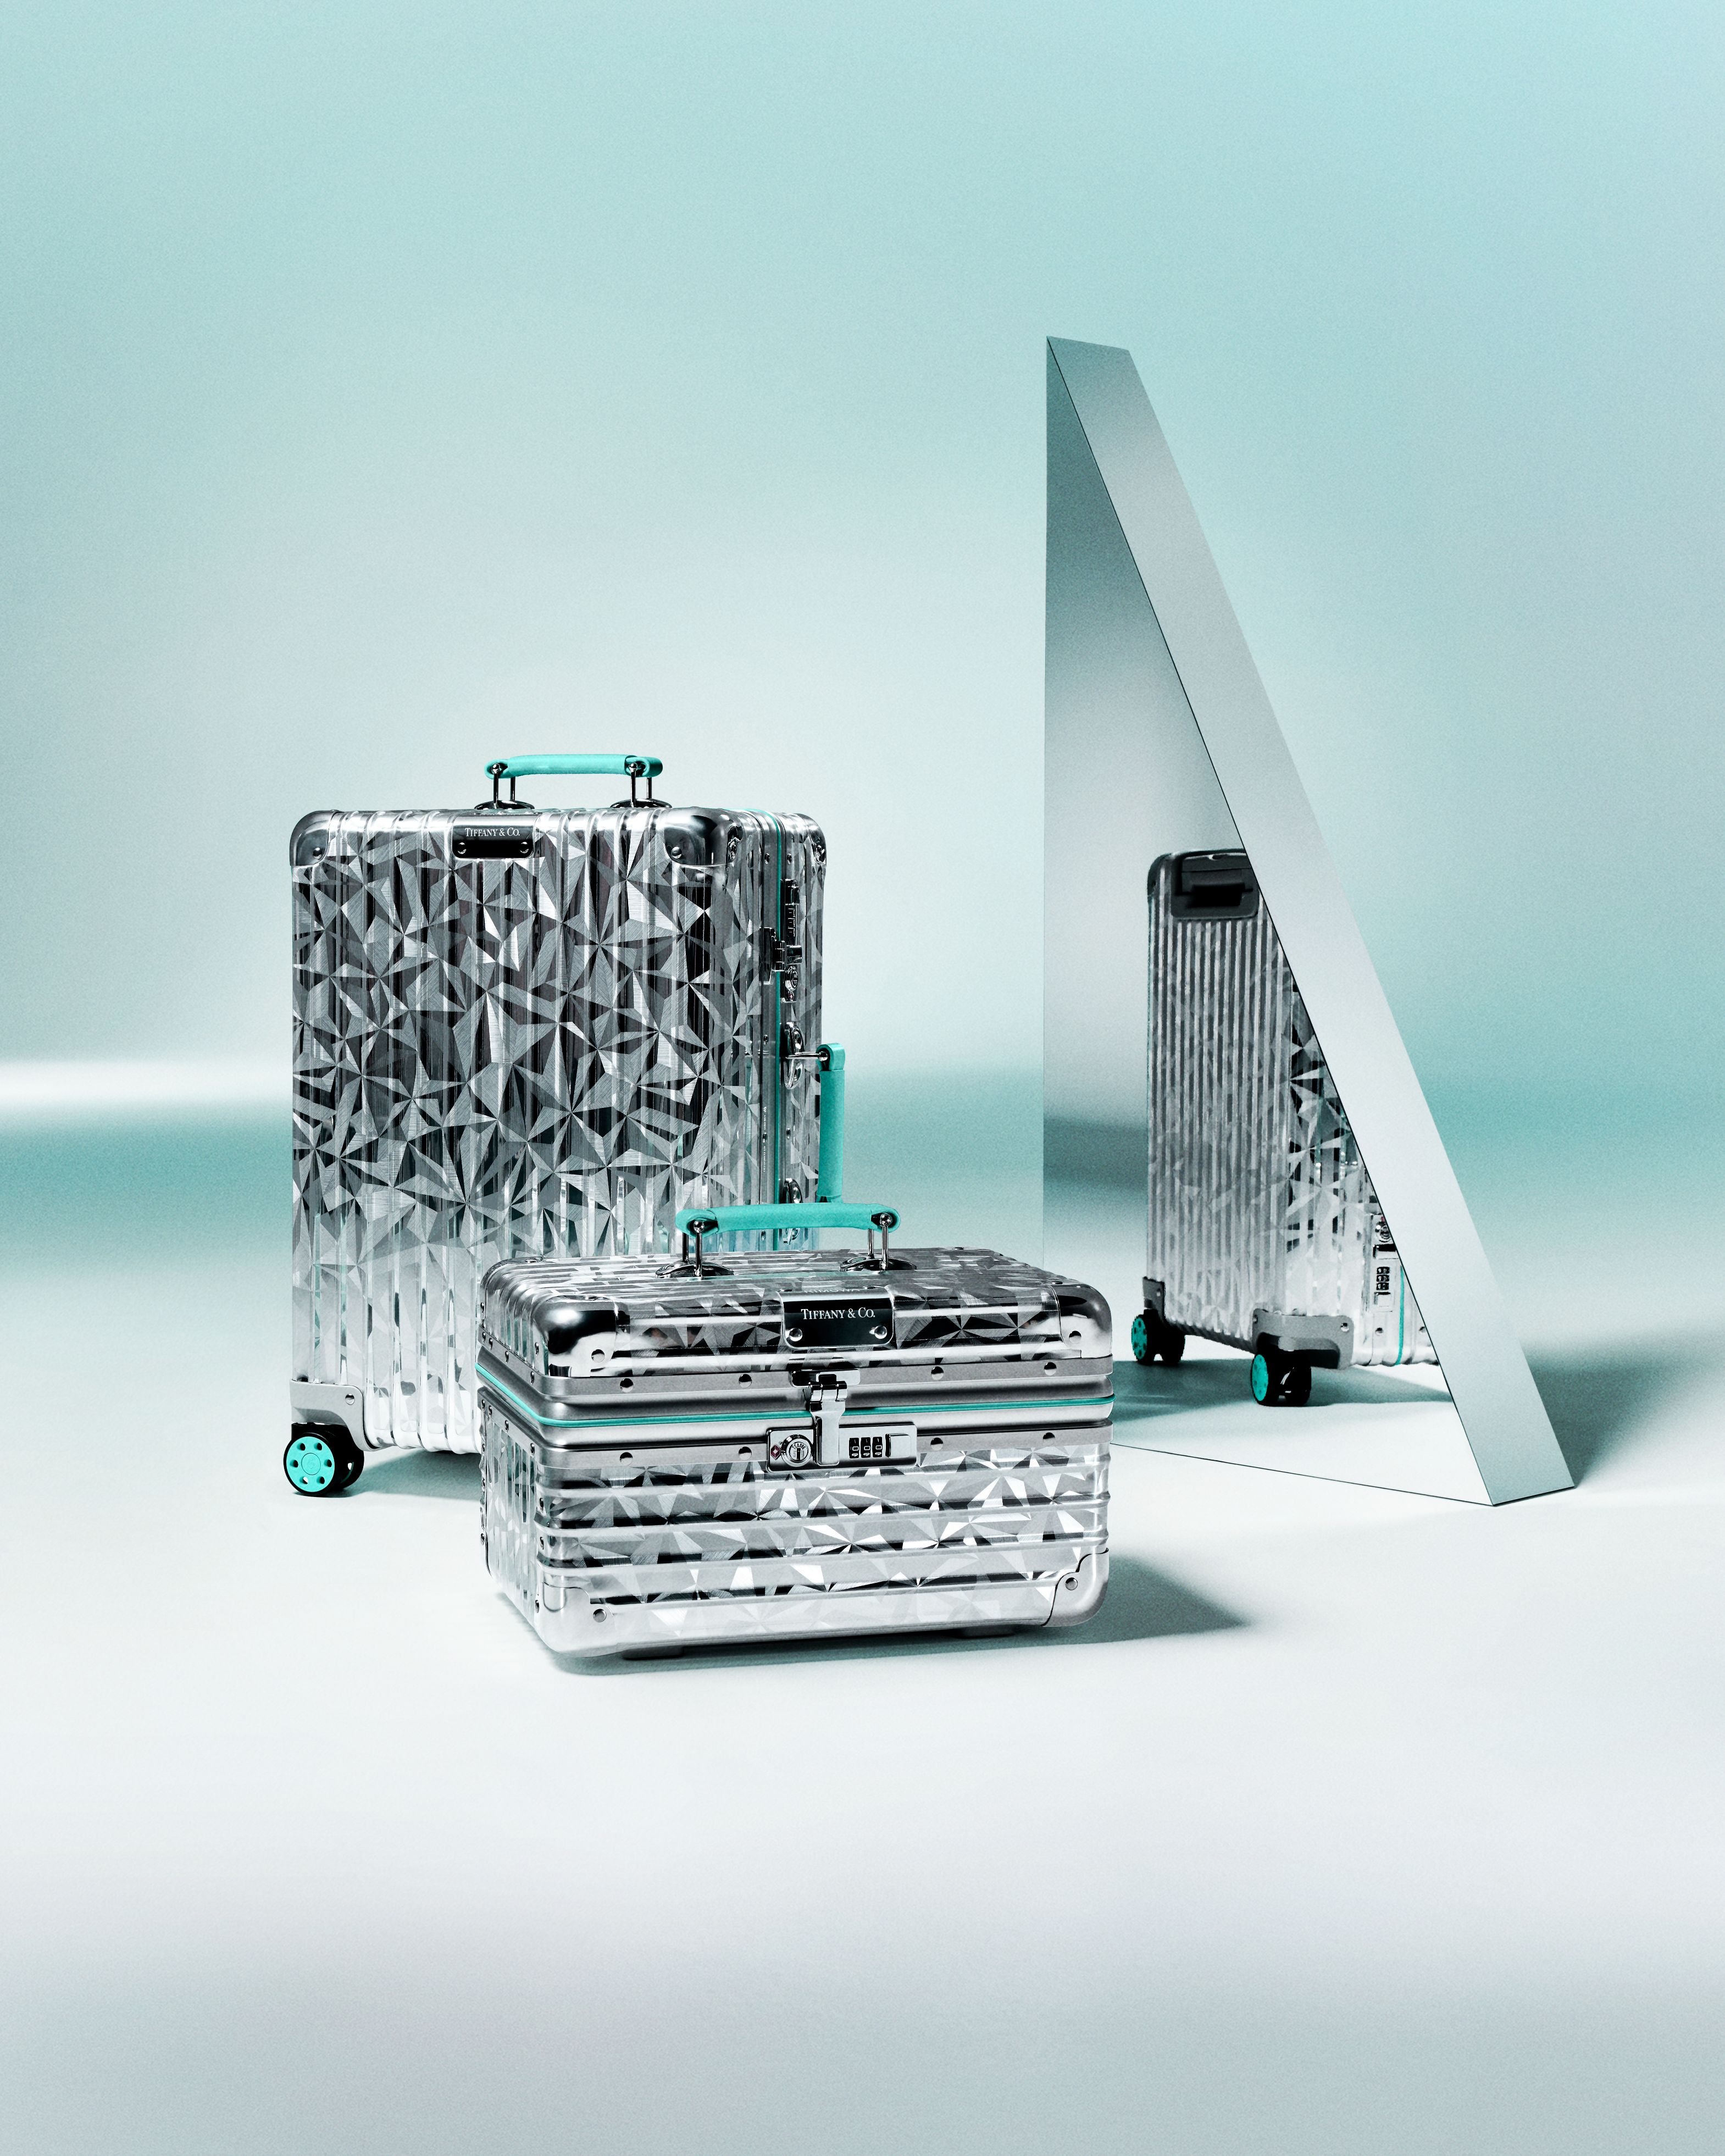 Campaign imagery of RIMOWA's Tiffany & Co. luggage collaboration